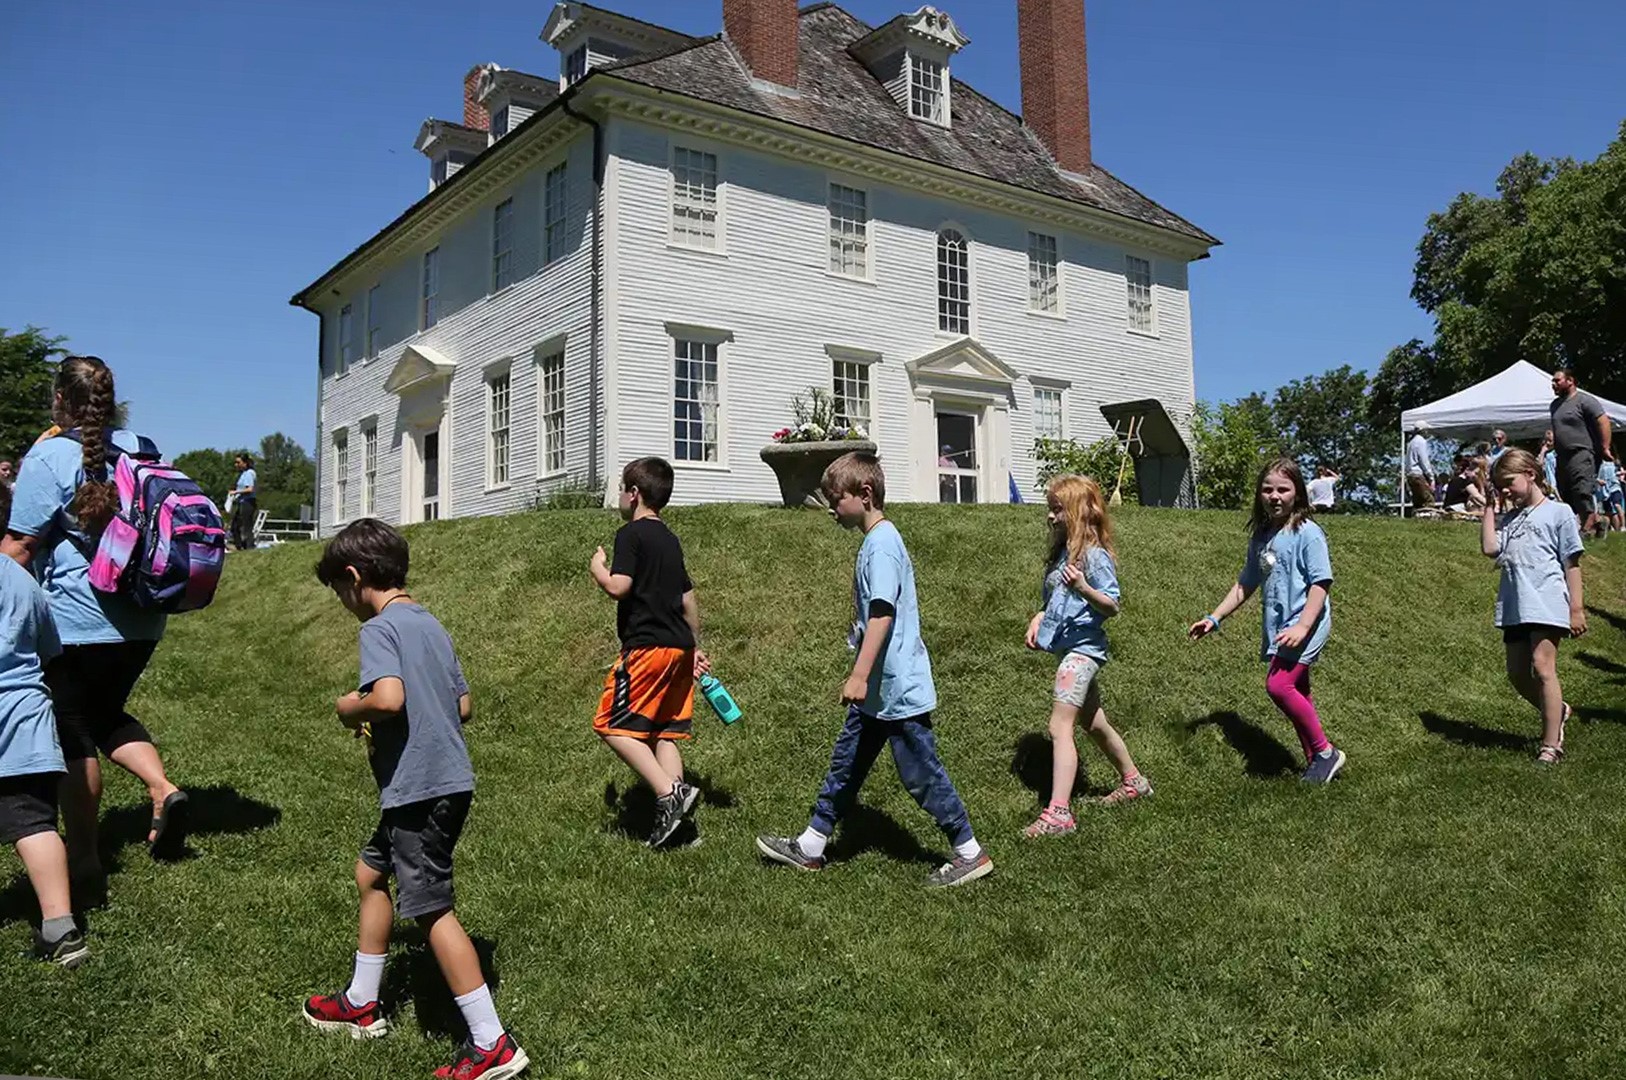 A line of children following an adult with a back pack from a pop-up tent across the lawn of a large historic house.